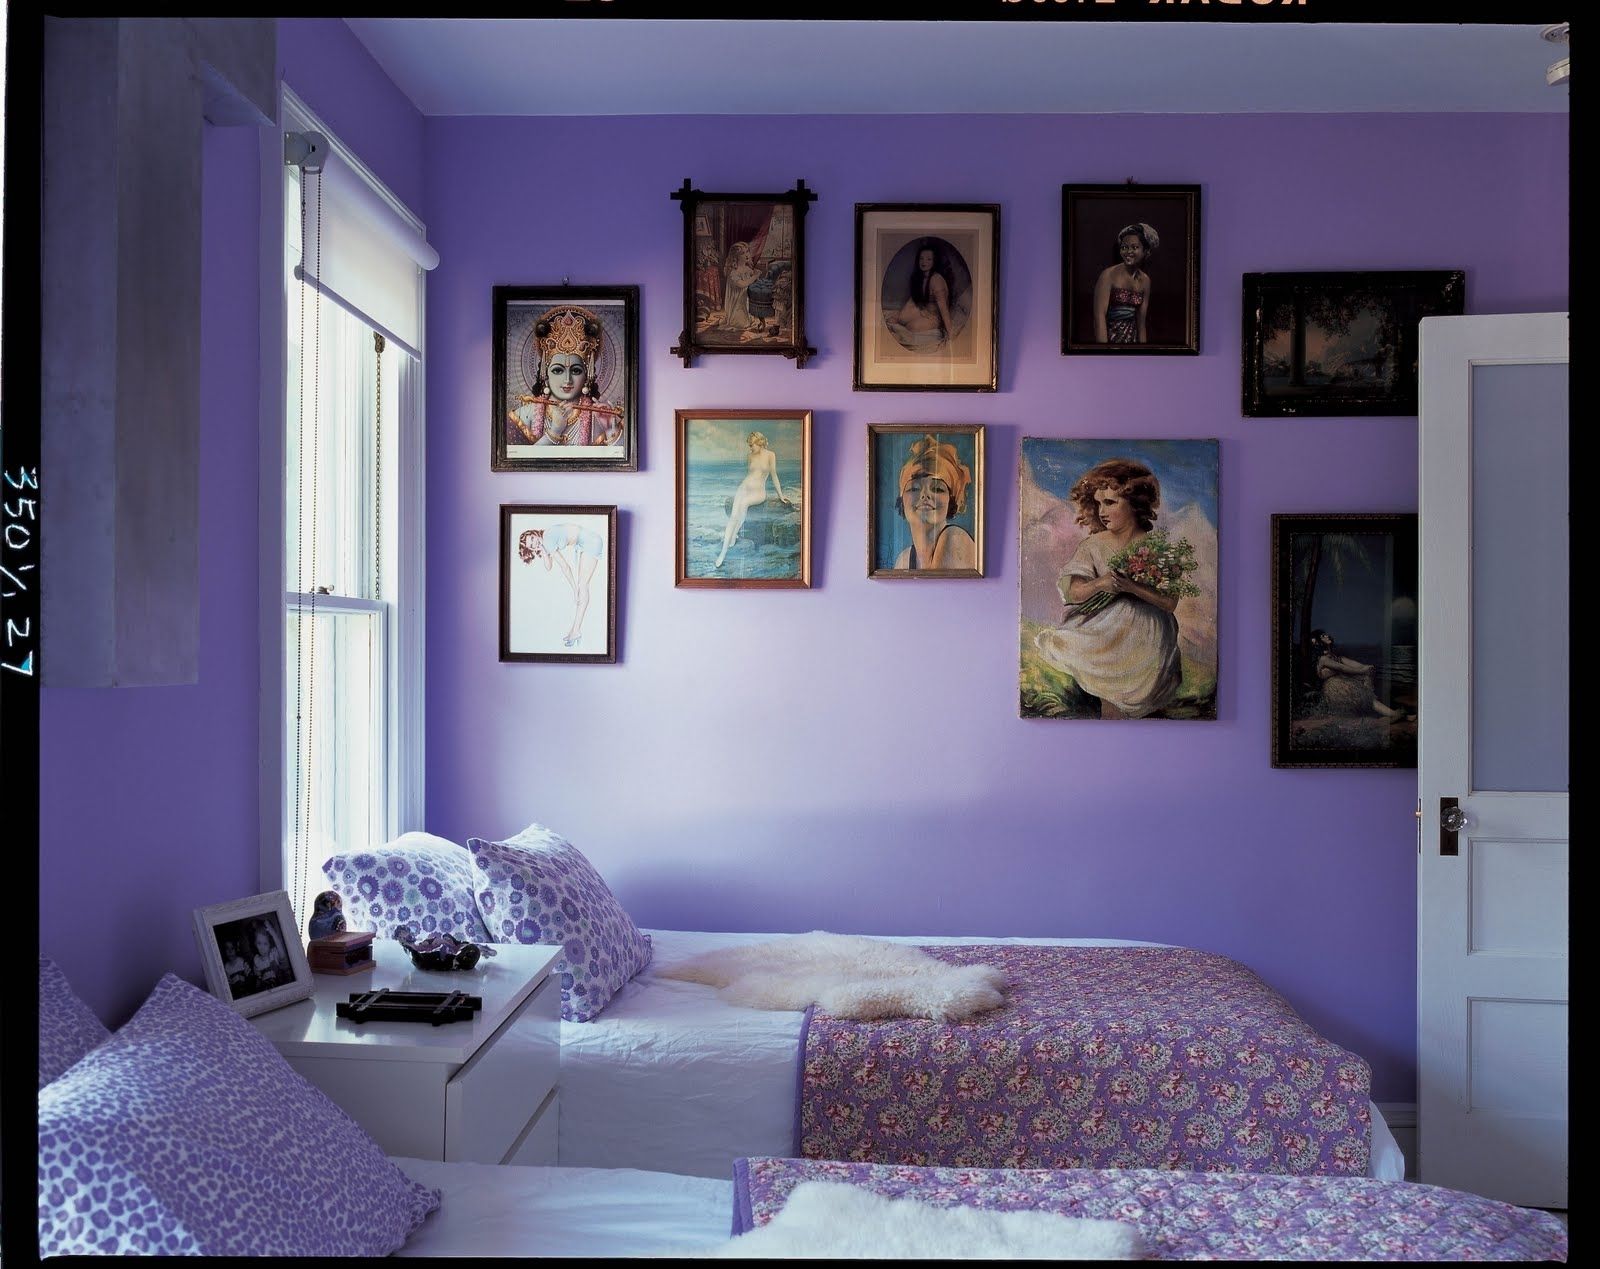 Well Liked Purple Wall Art For Bedroom In Bedroom : Purple Walls In Bedroom Home Interior Design Simple (View 6 of 15)